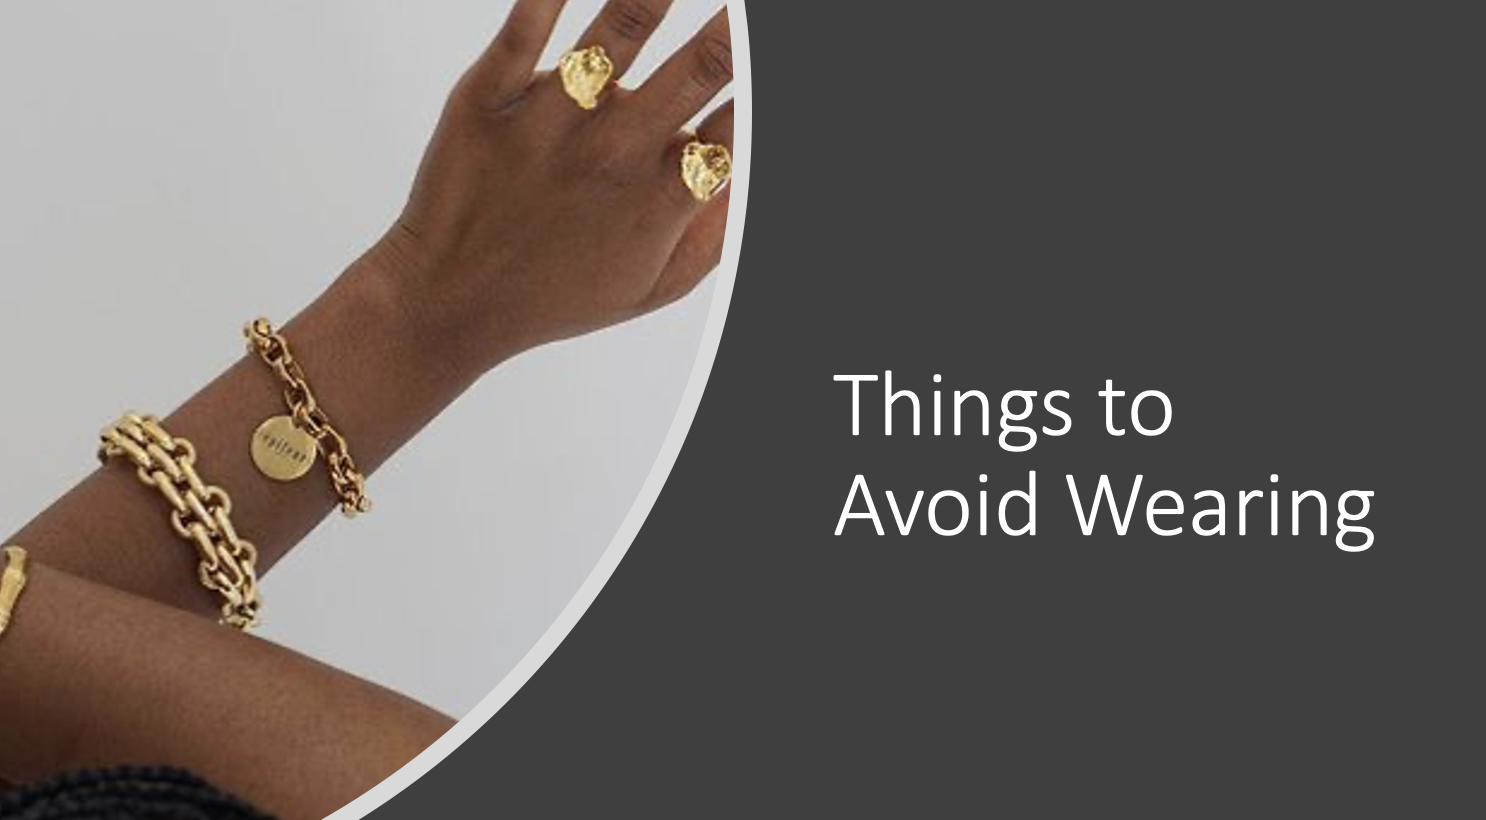 What to avoid wearing